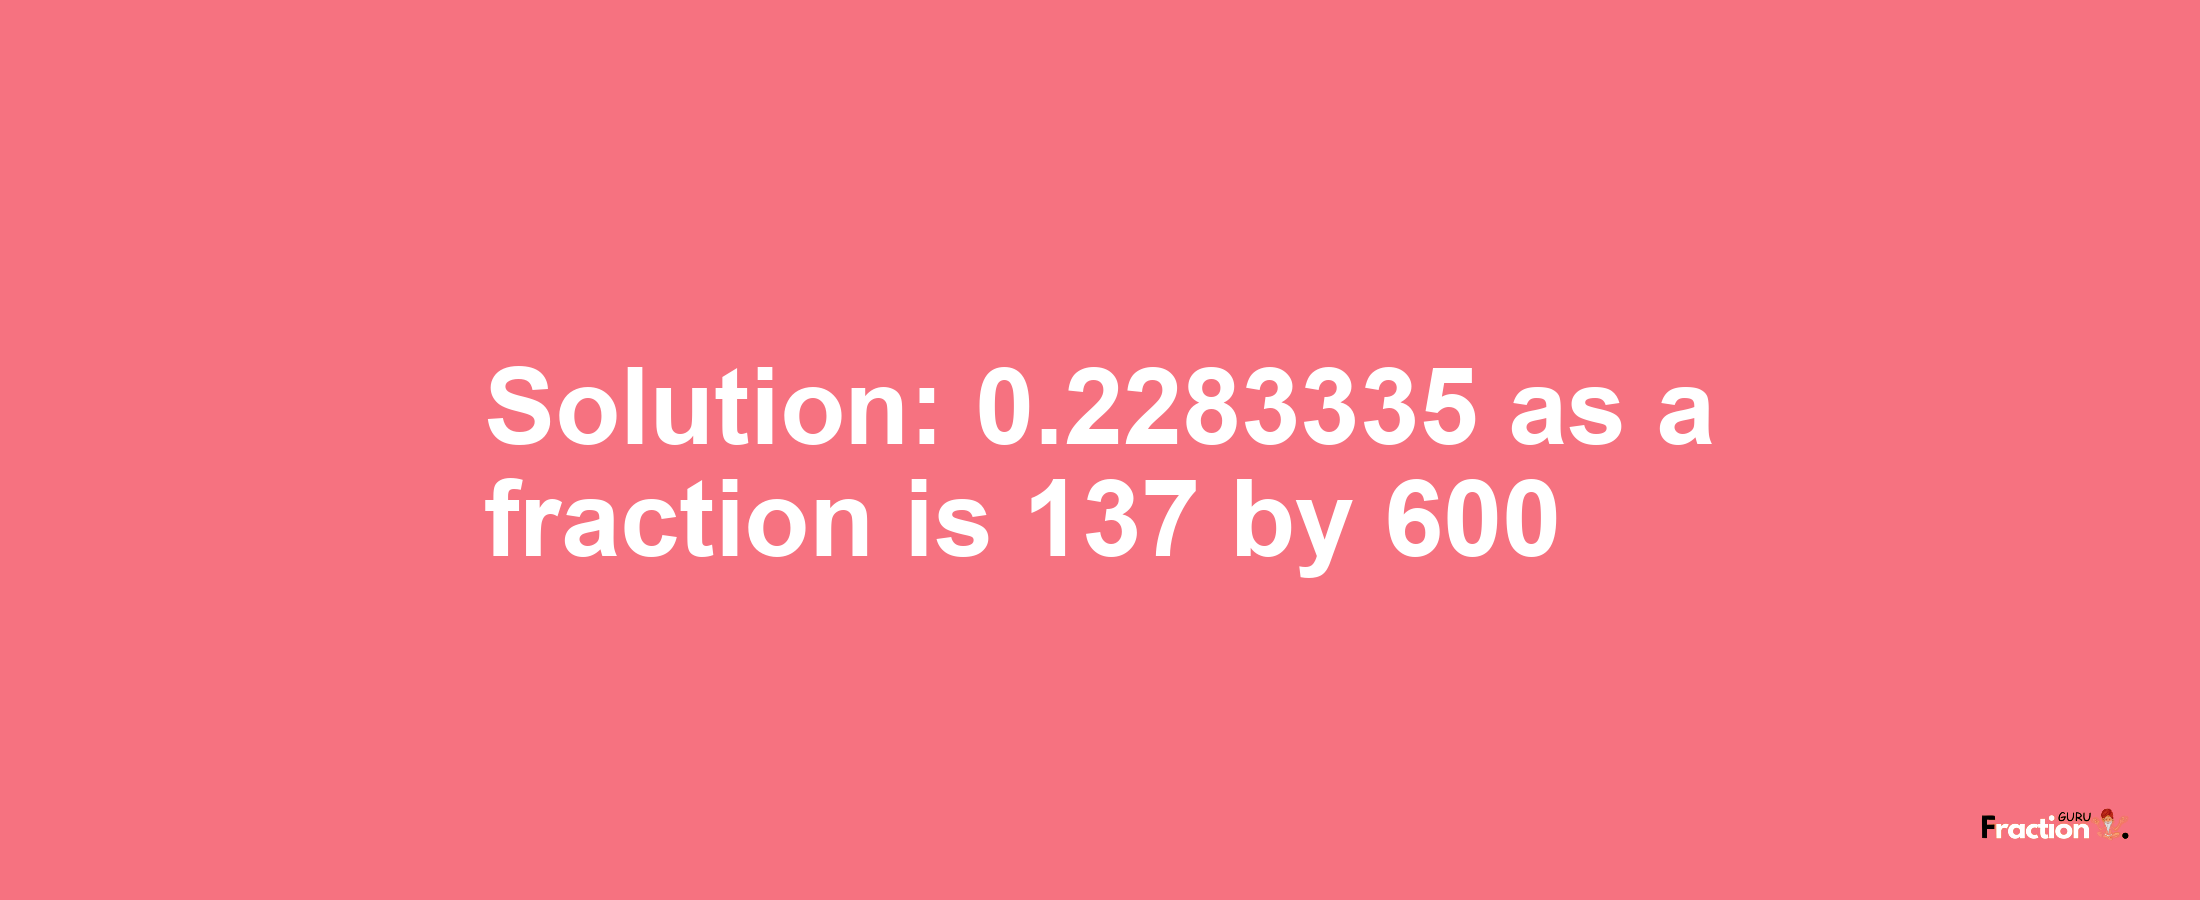 Solution:0.2283335 as a fraction is 137/600